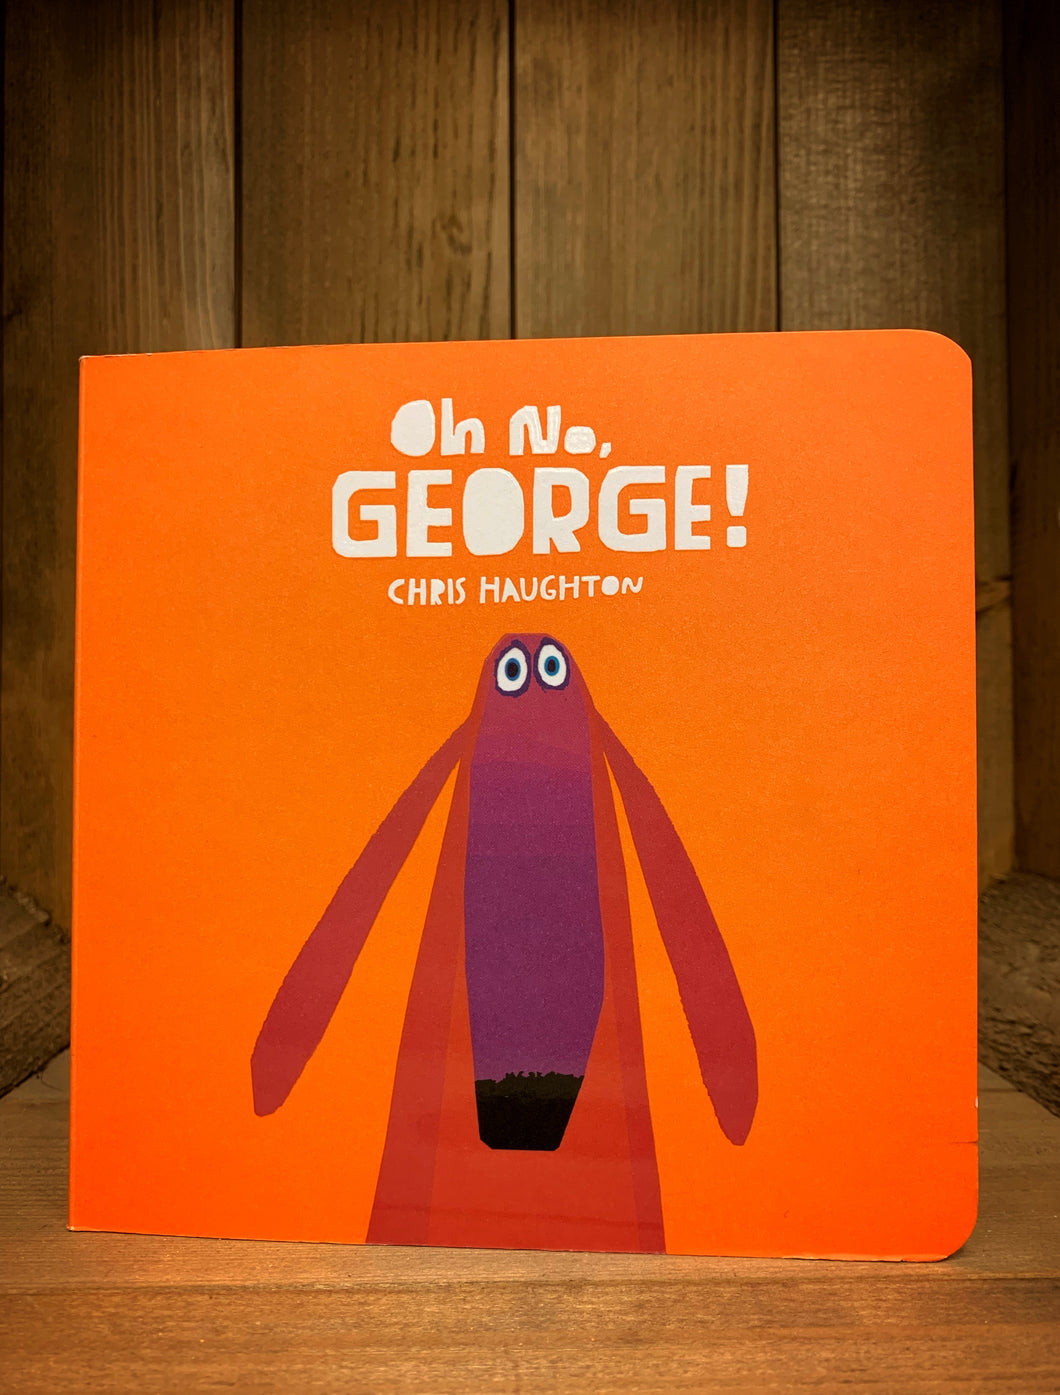 Image of the board book Oh No George! by Chris Haughton featuring a front cover with an orange background and a stylized illustration of a red dog.